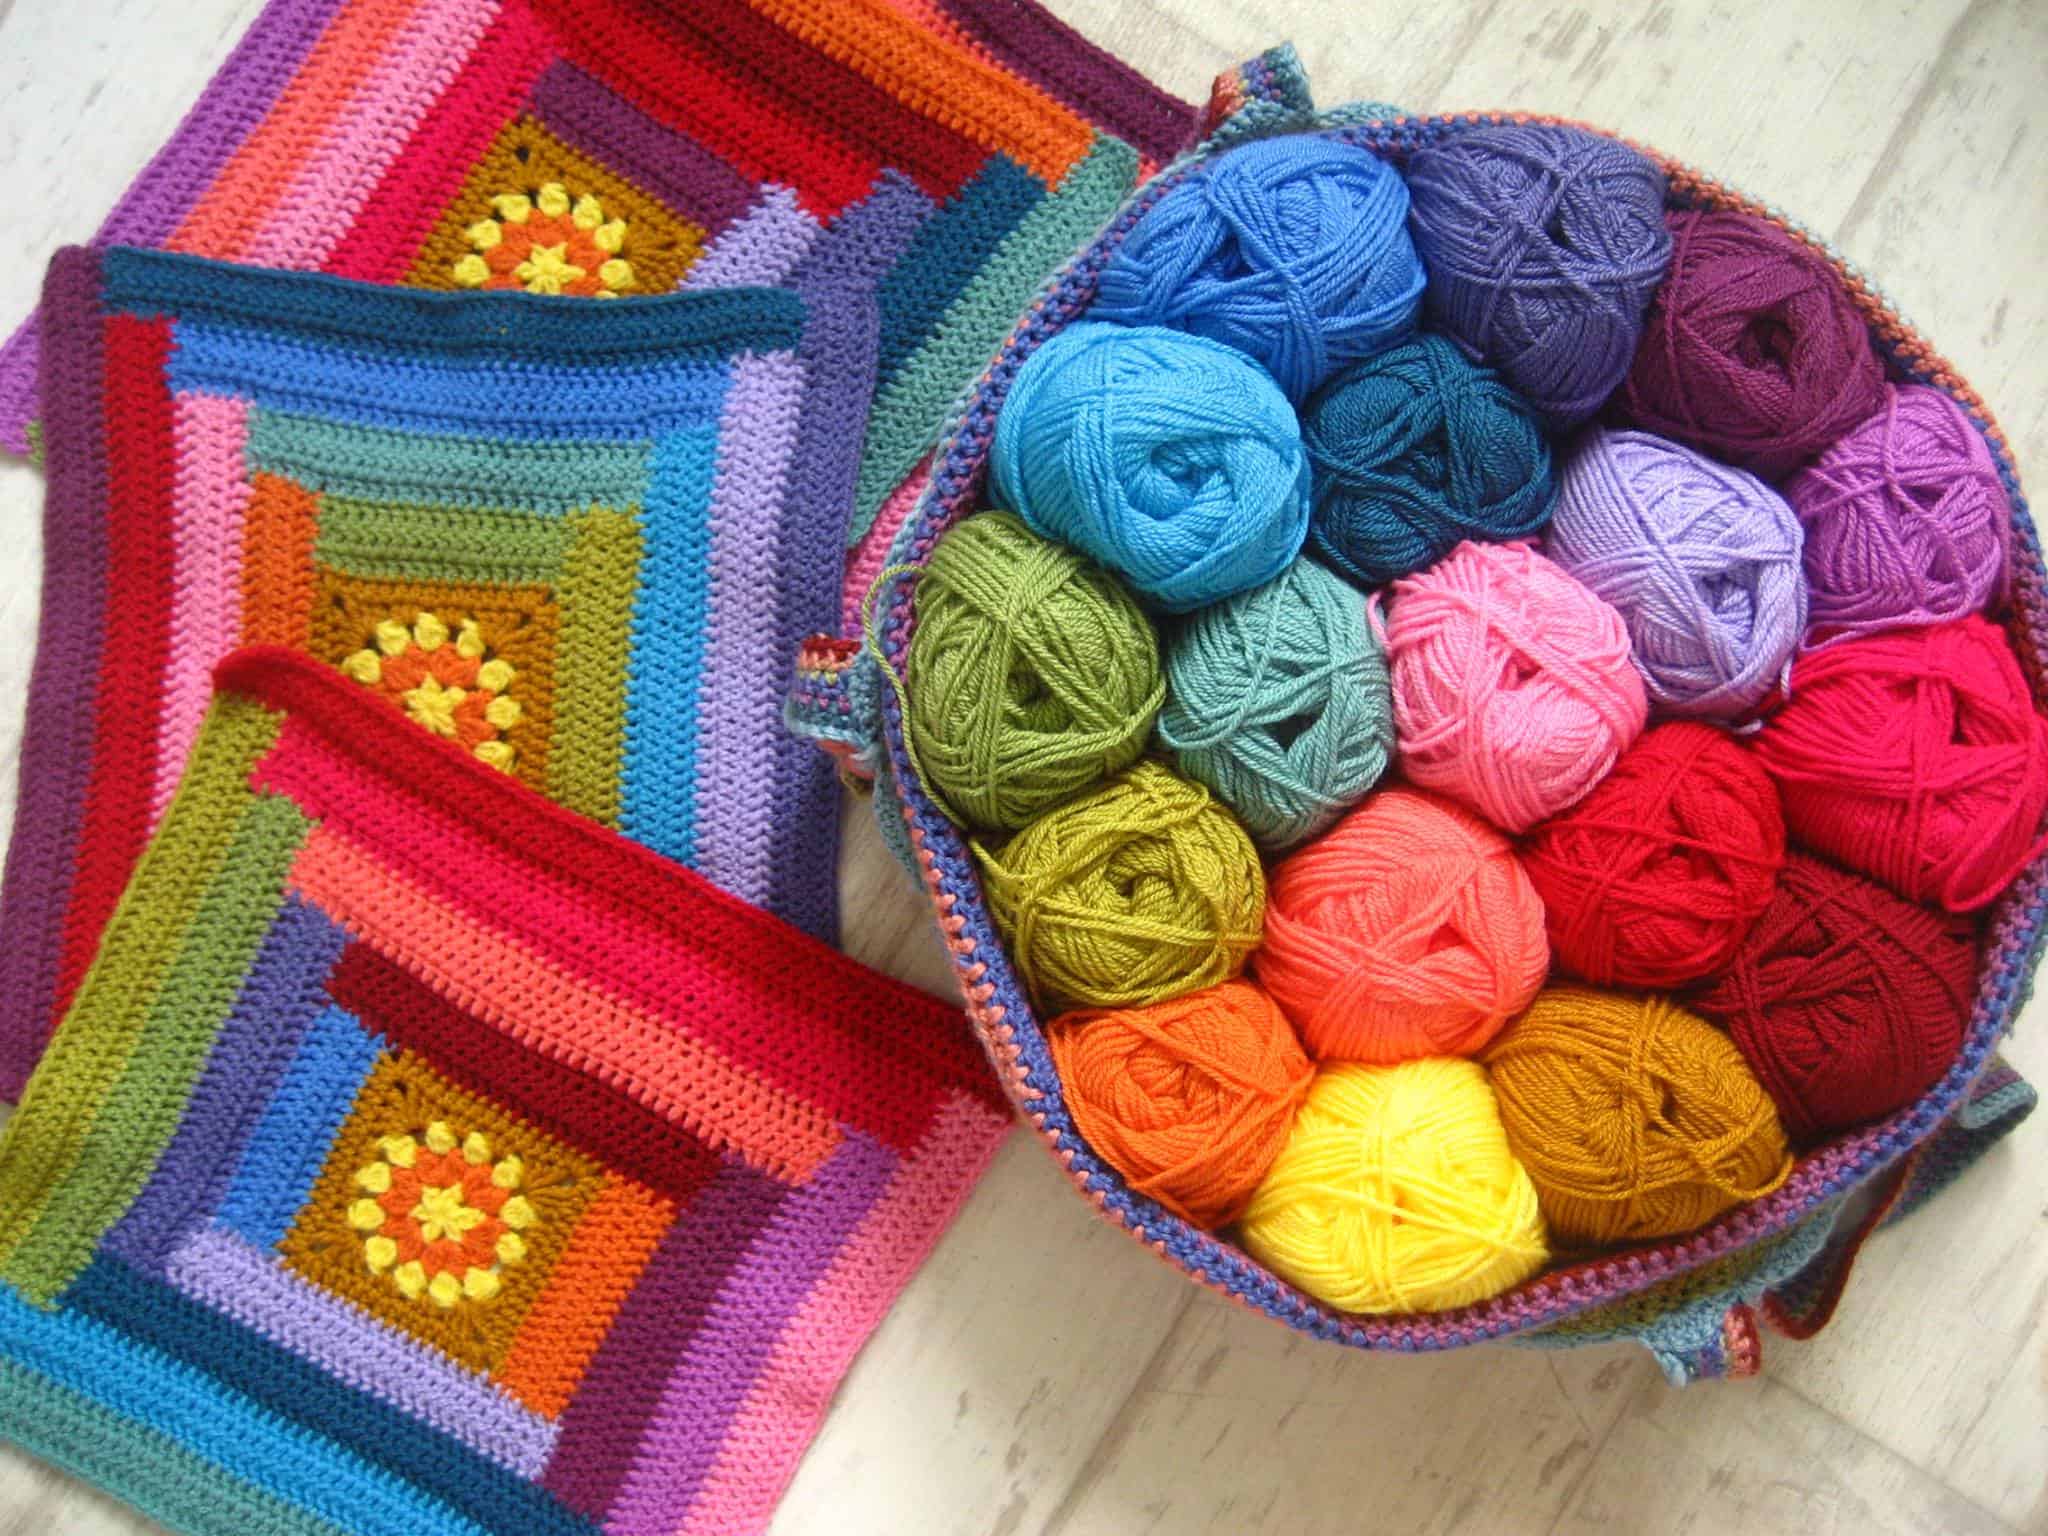 Attic24 Blankets, Coffee and Colour – a fabulous chat with Lucy